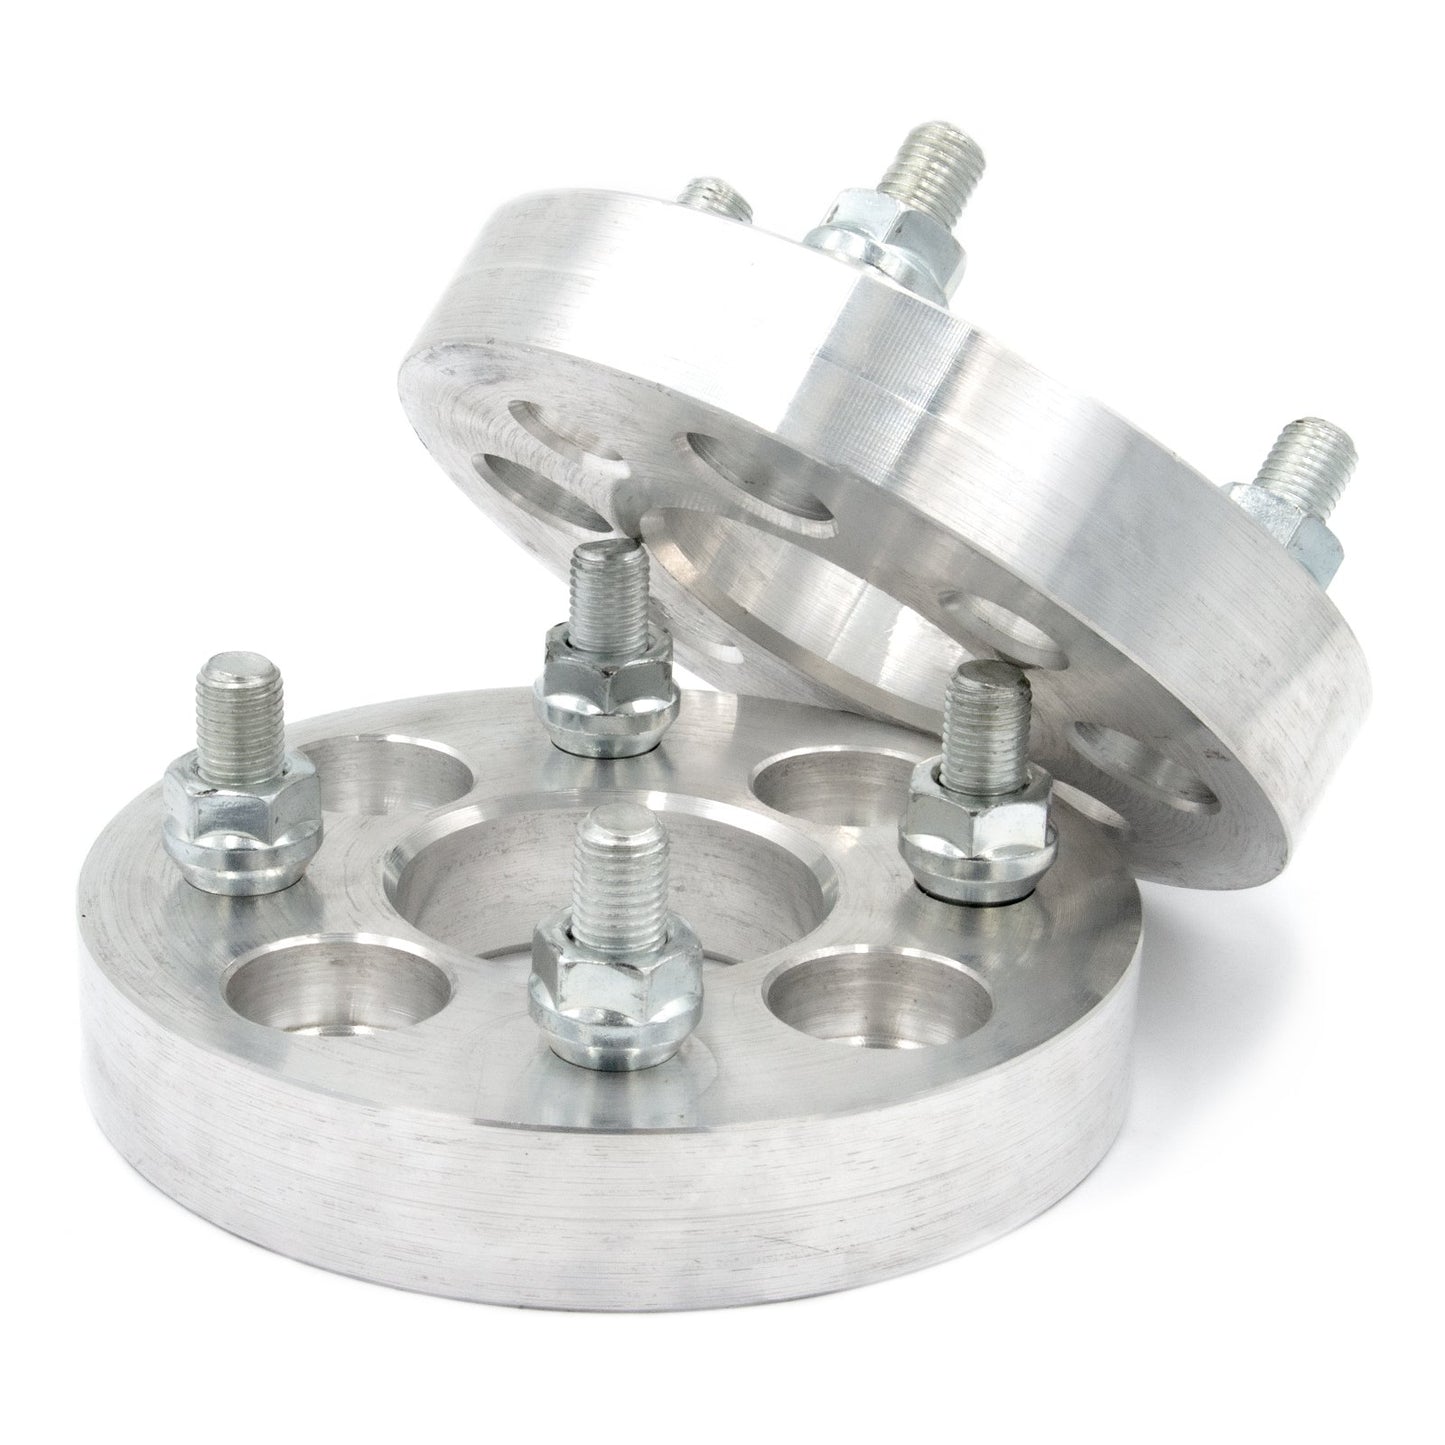 4x120 to 4x100 Wheel Spacer/Adapter - Thickness: 3/4"- 4"